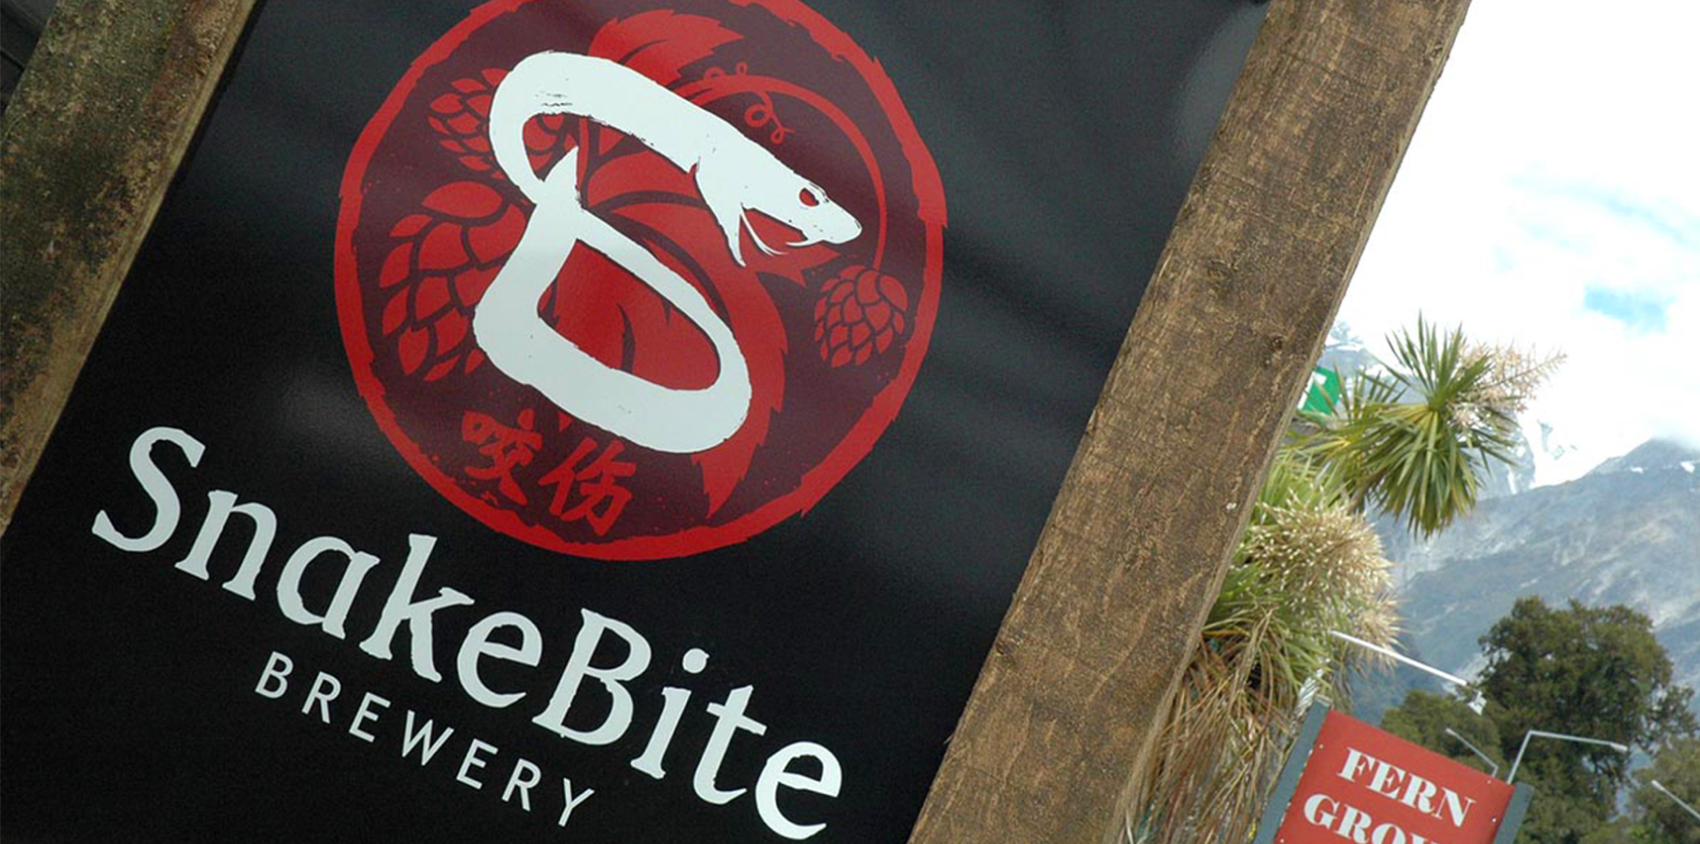 snakebite brewery case study banner